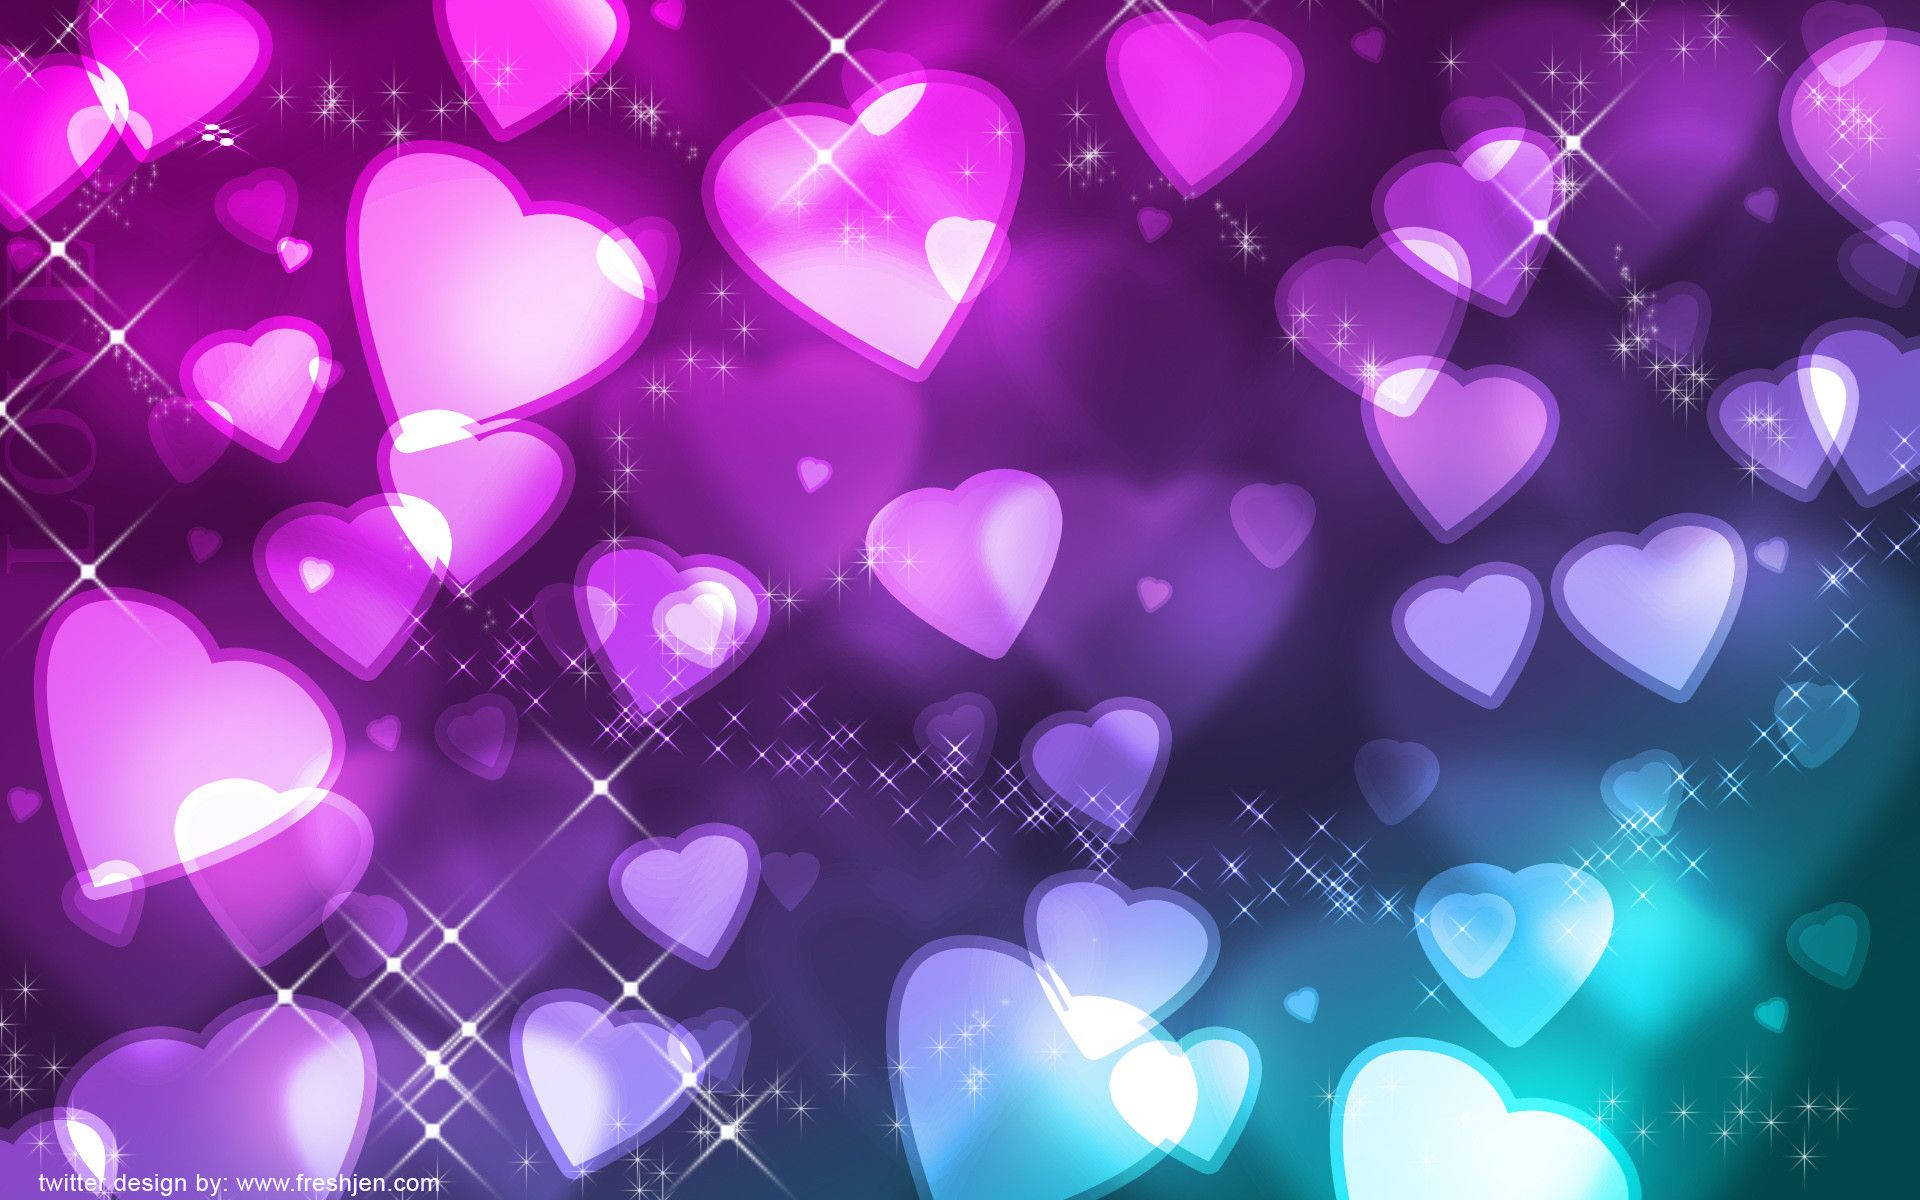 Free Hearts Wallpaper Downloads, Hearts Wallpaper for FREE